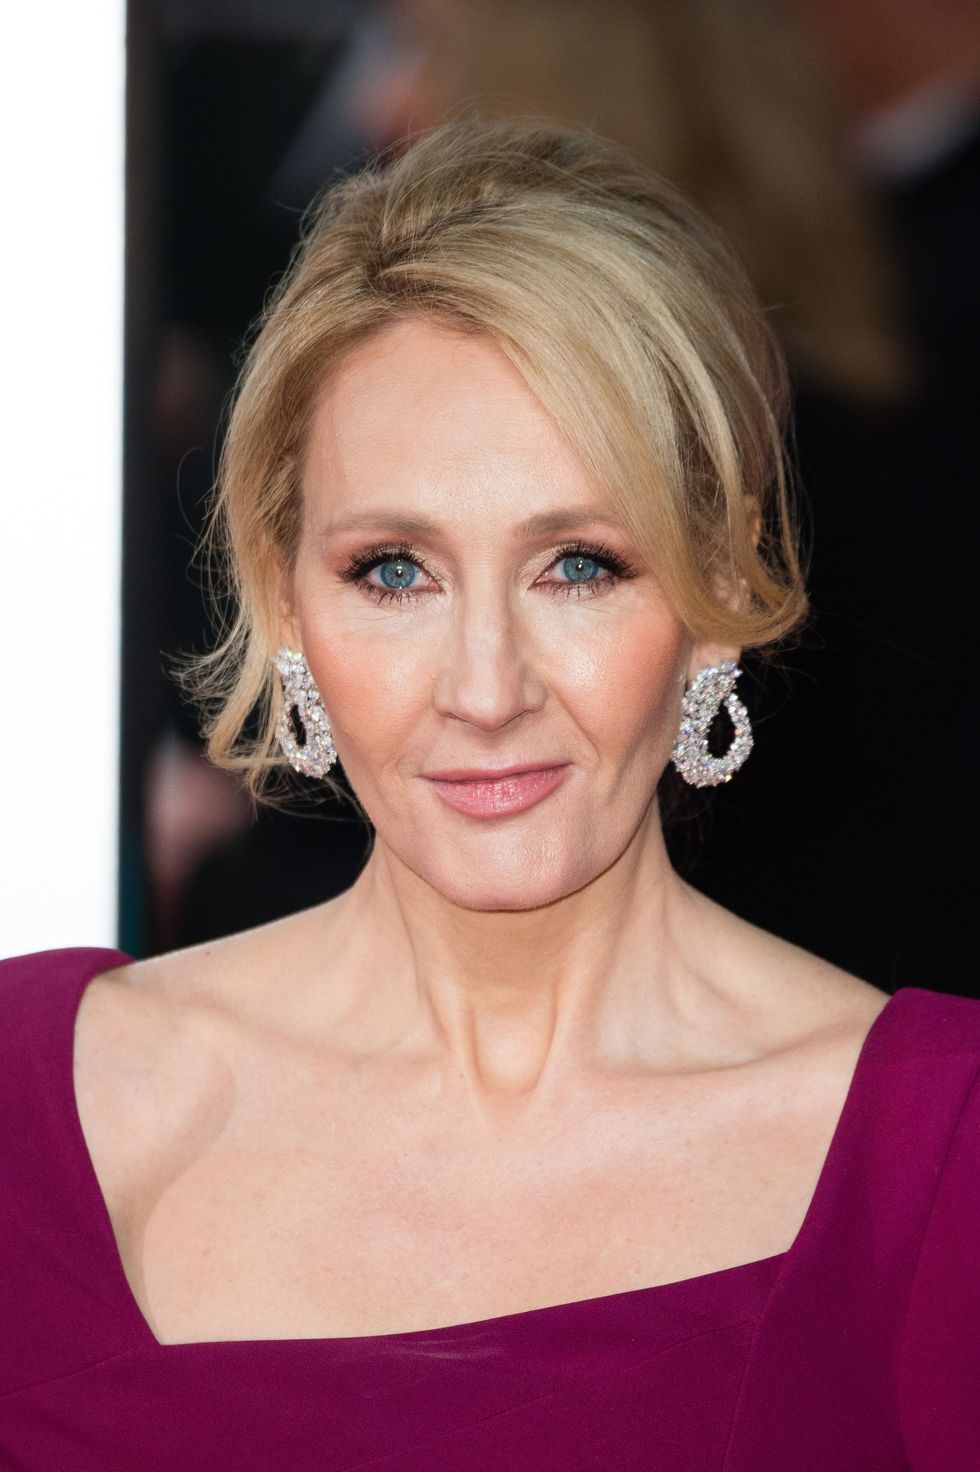 LONDON, ENGLAND - FEBRUARY 12:  J.K. Rowling attends the 70th EE British Academy Film Awards (BAFTA) at Royal Albert Hall on February 12, 2017 in London, England.  (Photo by Jeff Spicer/Getty Images)